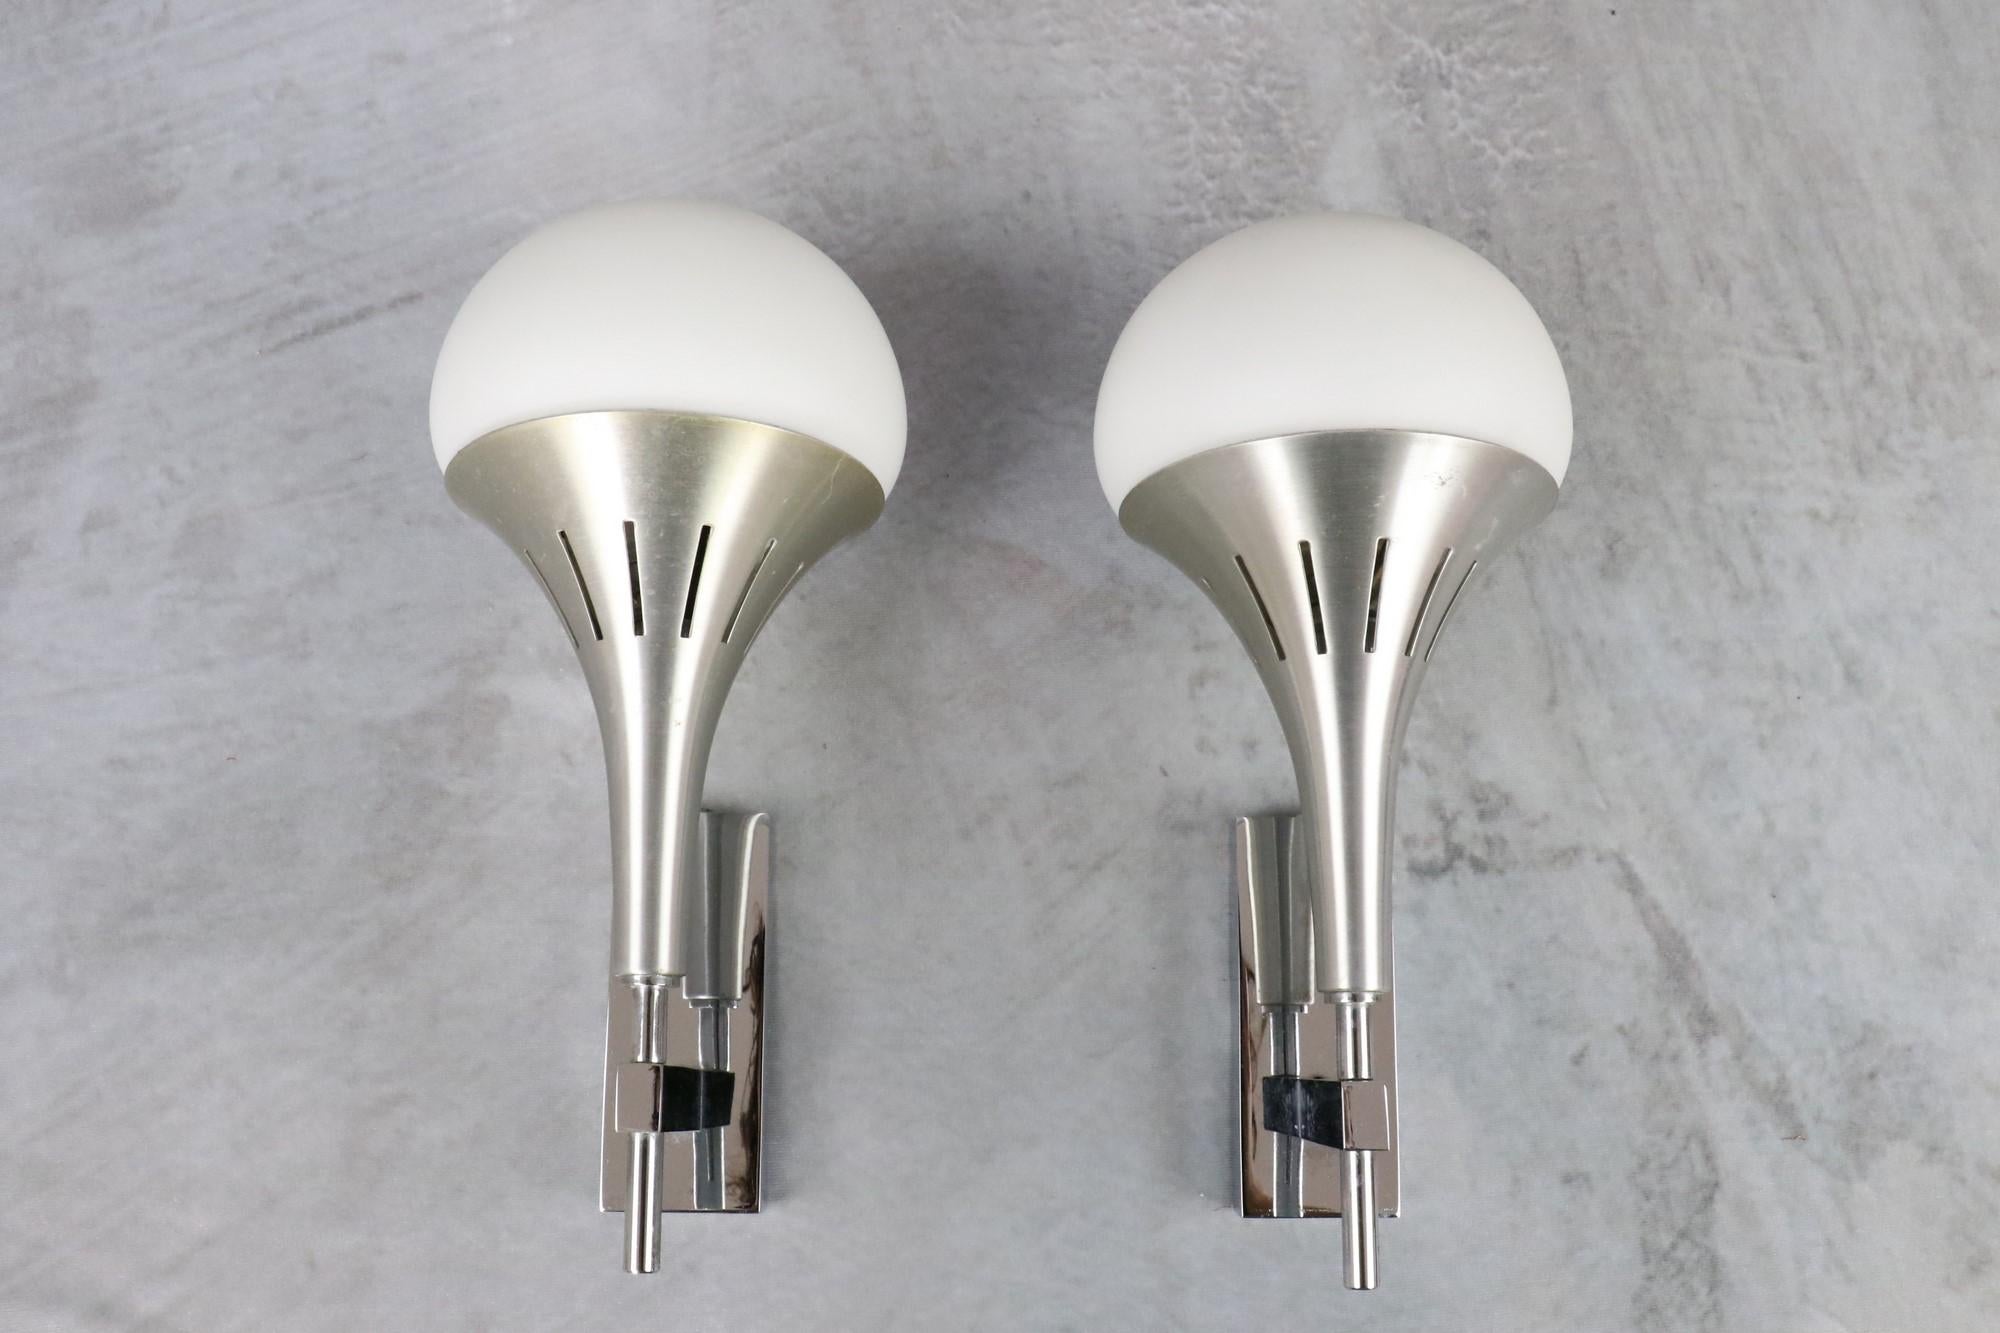 Pair of 1960s Italian Gaetano Sciolari midcentury Wall Lights

Very beautiful and rare pair of sconces by Gaetano Sciolari. The combination of metal and opaline gives them a lot of elegance and modernity.